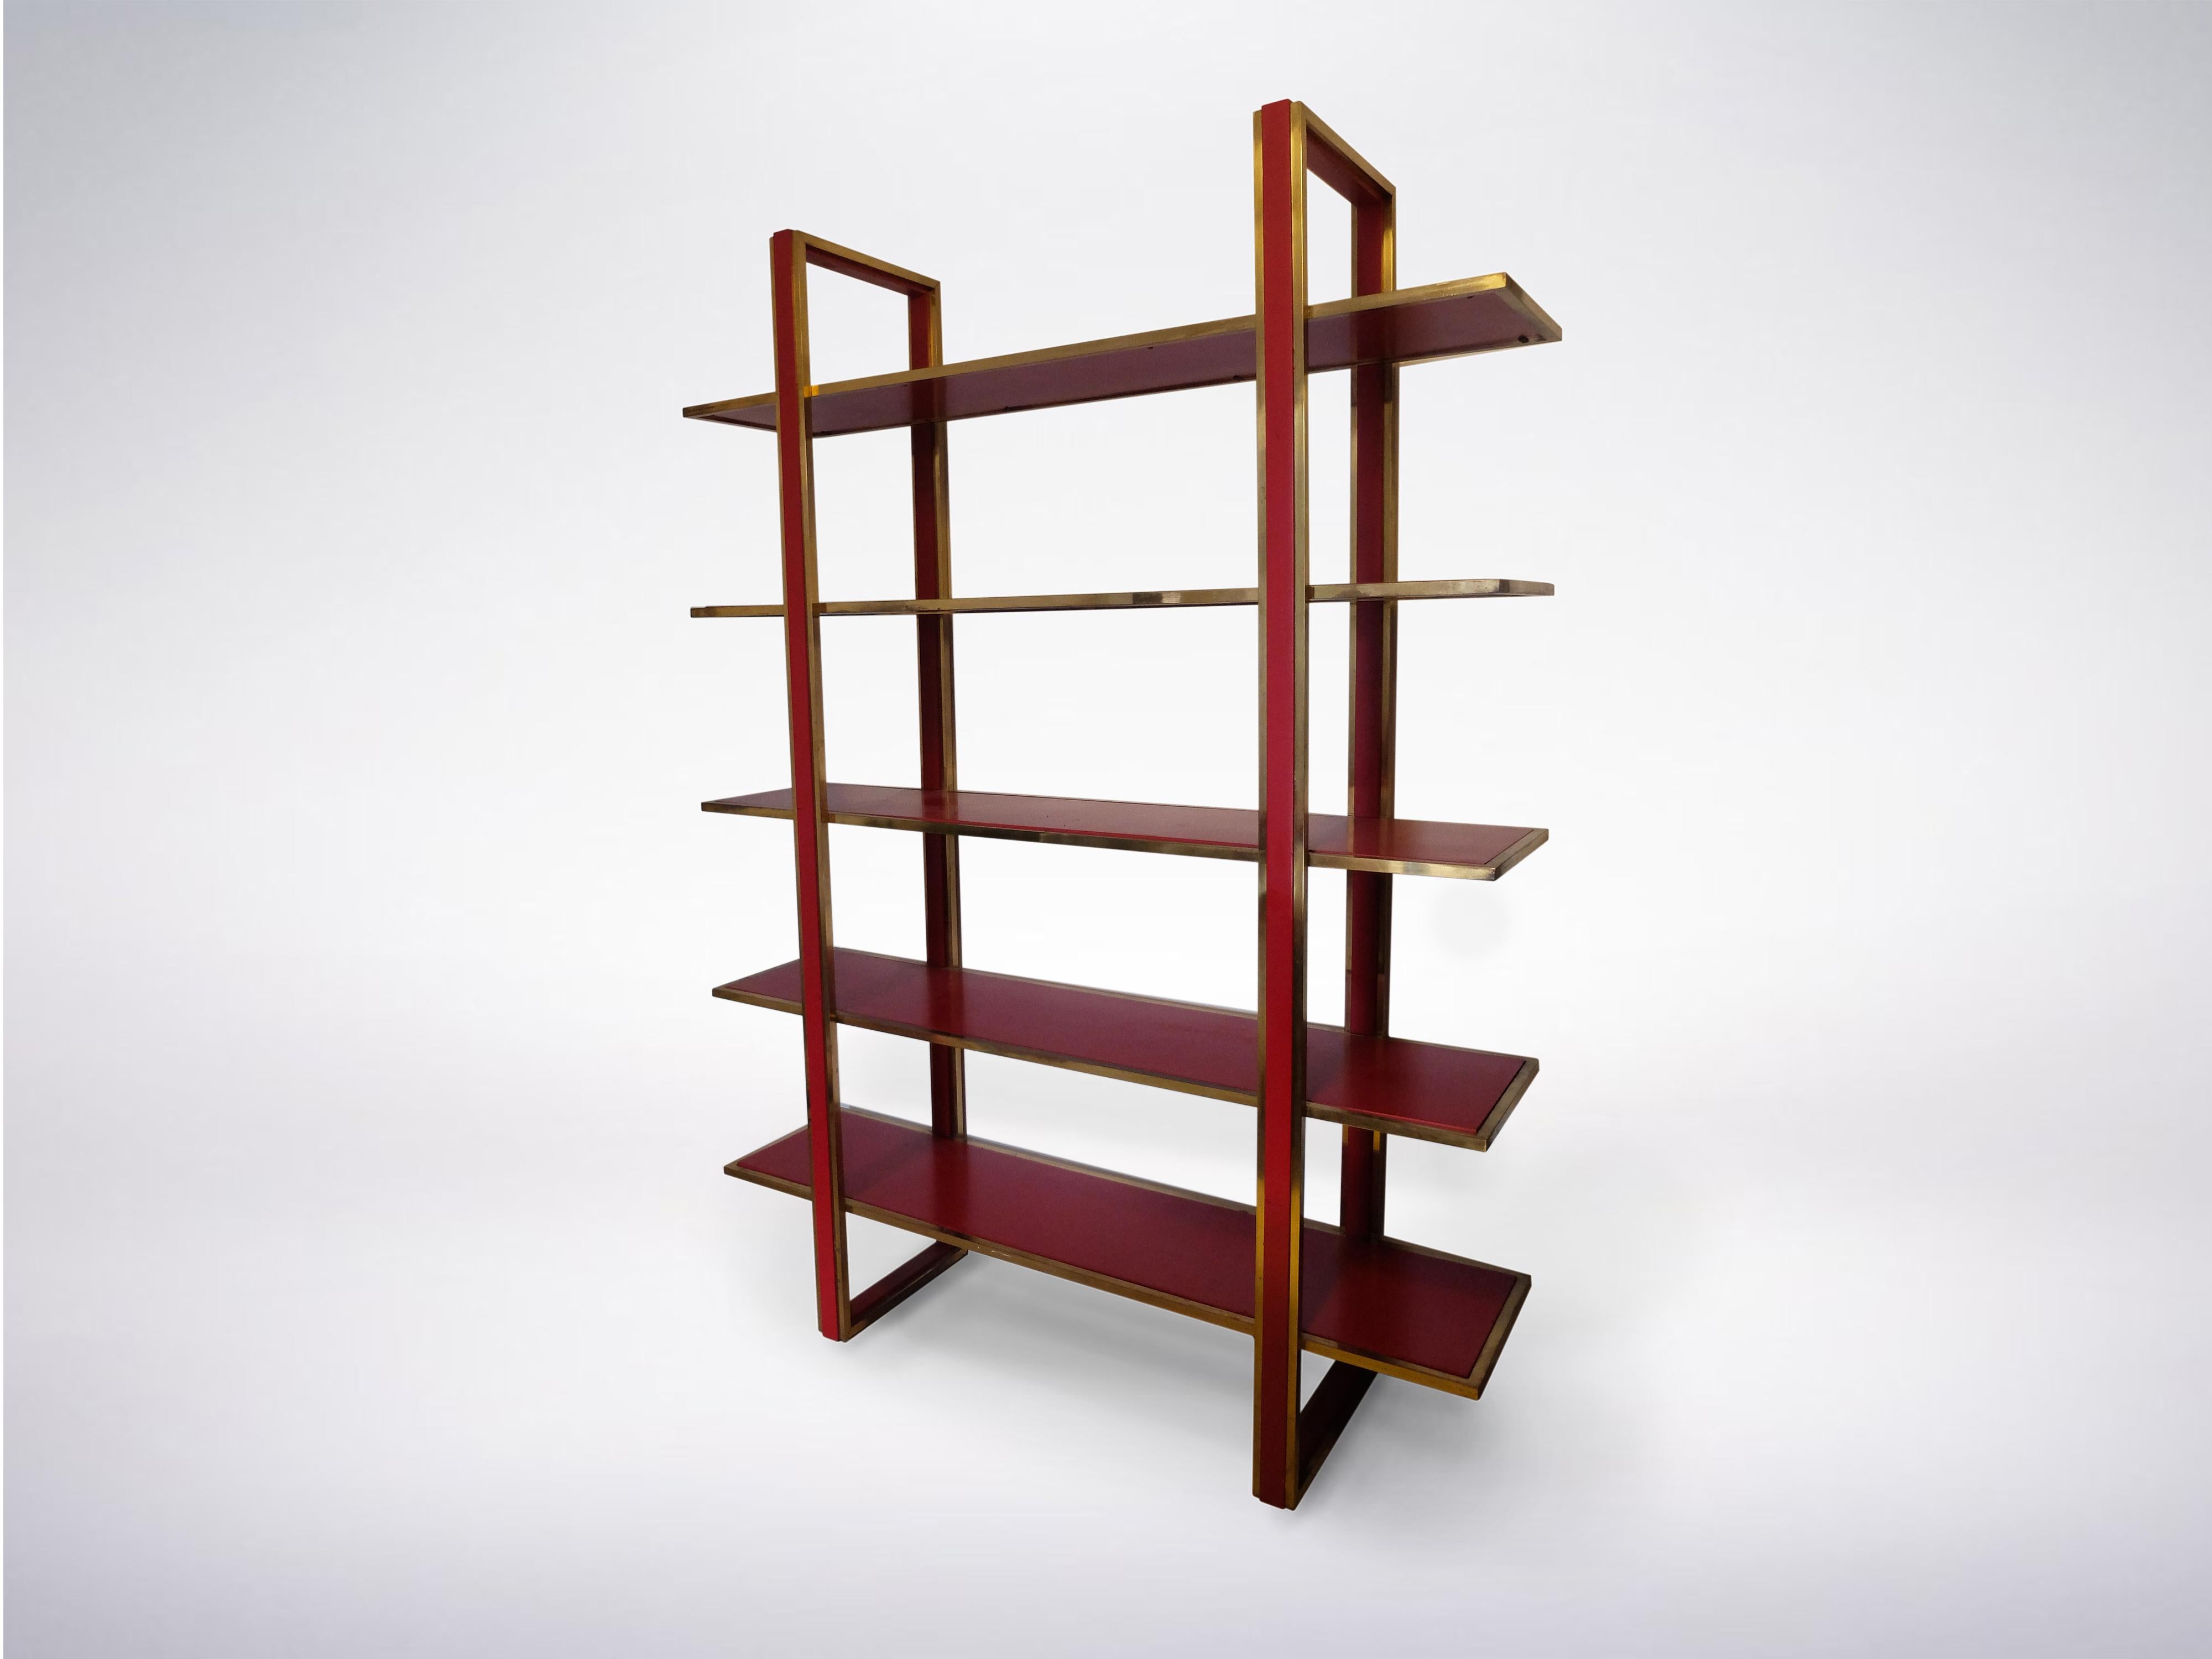 Geometric Mid-Century Italian Bookshelf in brass and deep red lacquered wood by Romeo Rega, 1970s.

The brass on this Bookshelf presents an exquisitely aged patina. while the incredible Deep Red Lacquer of the wooden panels contrasts perfectly with